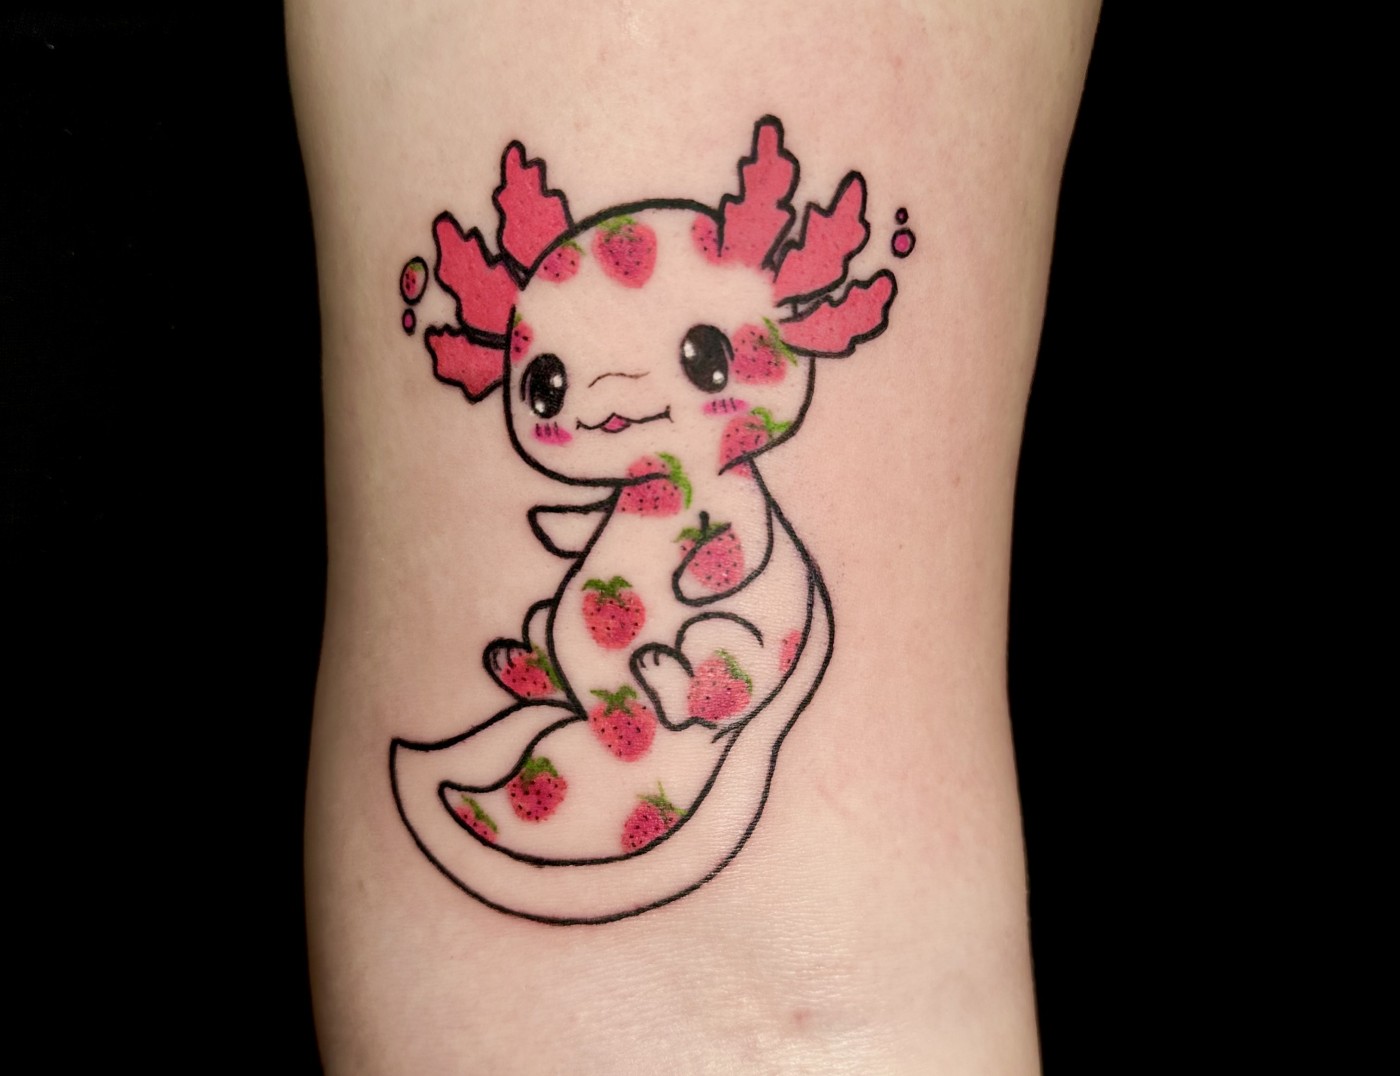 Axoioti Salamander Animal Tattoo By Morana, a guest artist at Iron Palm Tattoos in Atlanta, GA. Axolotl tattoos usually represent a desire for healing and regeneration in life. Others choose axolotl tattoos as a tribute to the environment and a commitment to protecting the nature. Morana comes to us from Iron & Ink Tattoo studio in Los Angeles. She is available for booking Sept 23 - 27th. Call 404-973-7828 or stop by for a free consultation. Walk ins are welcome.